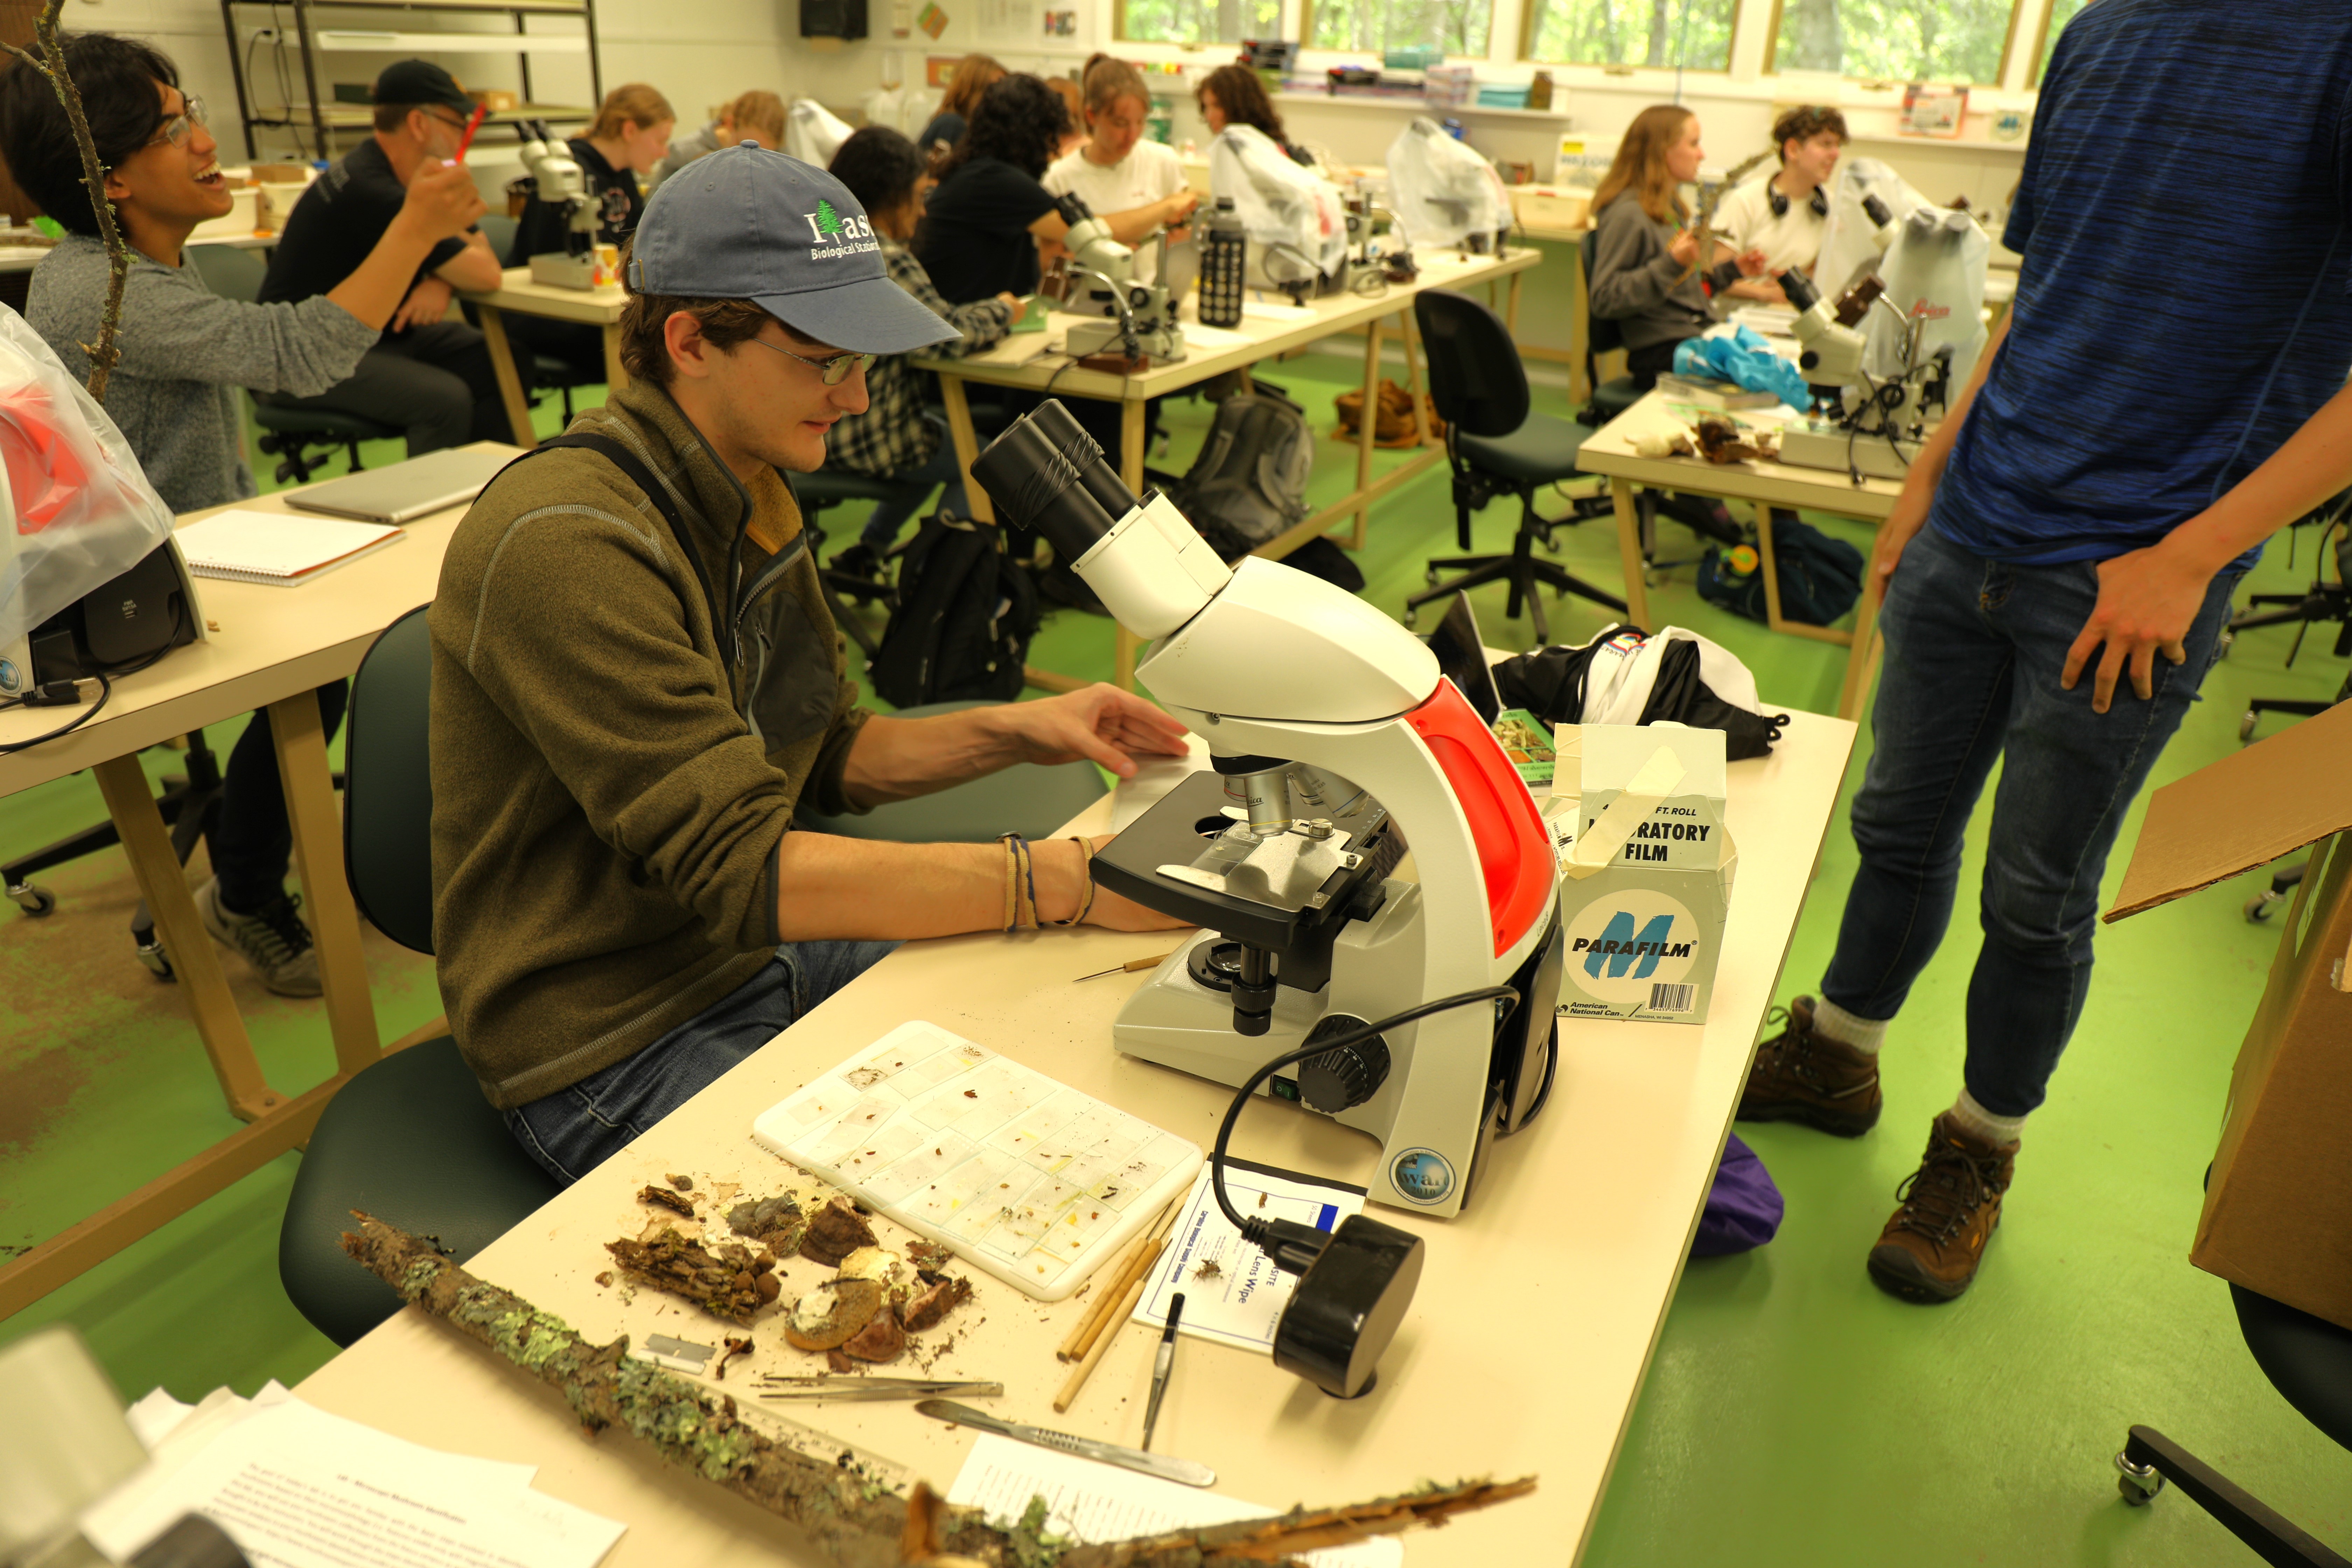 Students sitting at microscopes, looking at specimens from the field